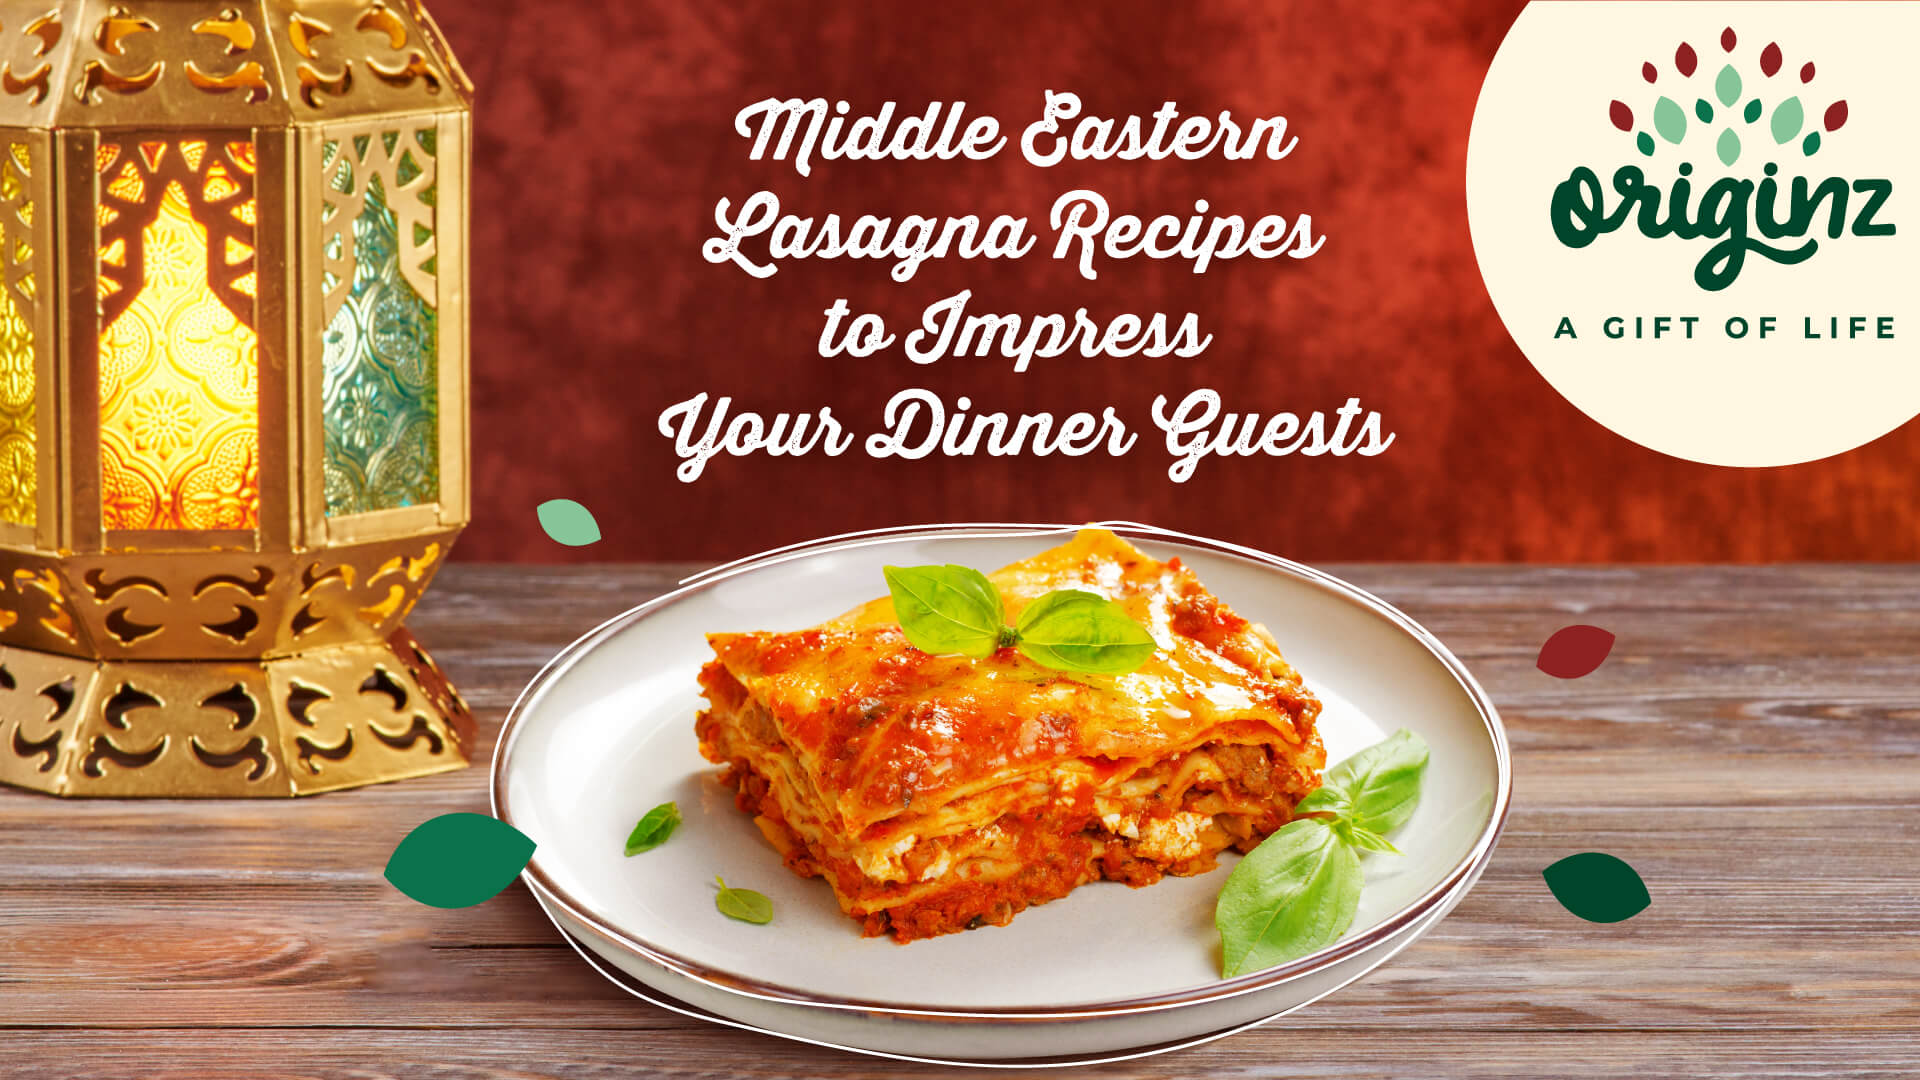 Middle Eastern Lasagna Recipes to Impress Your Dinner Guests